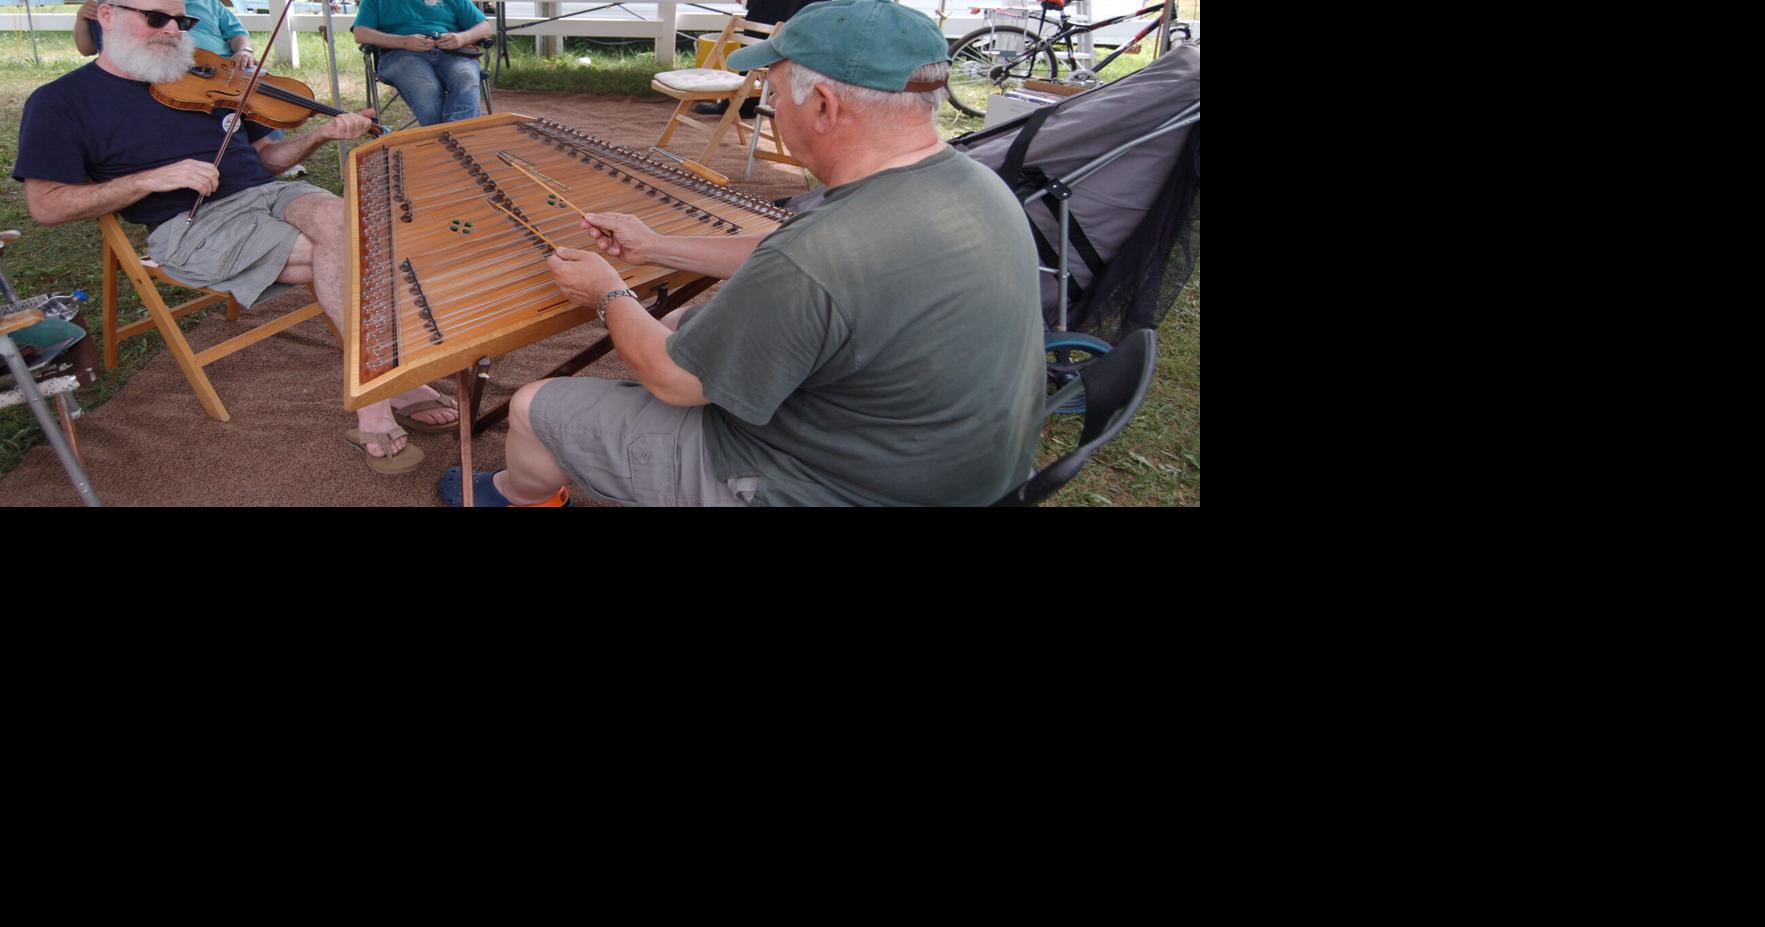 Evart to host largest hammered dulcimer festival in the world this week